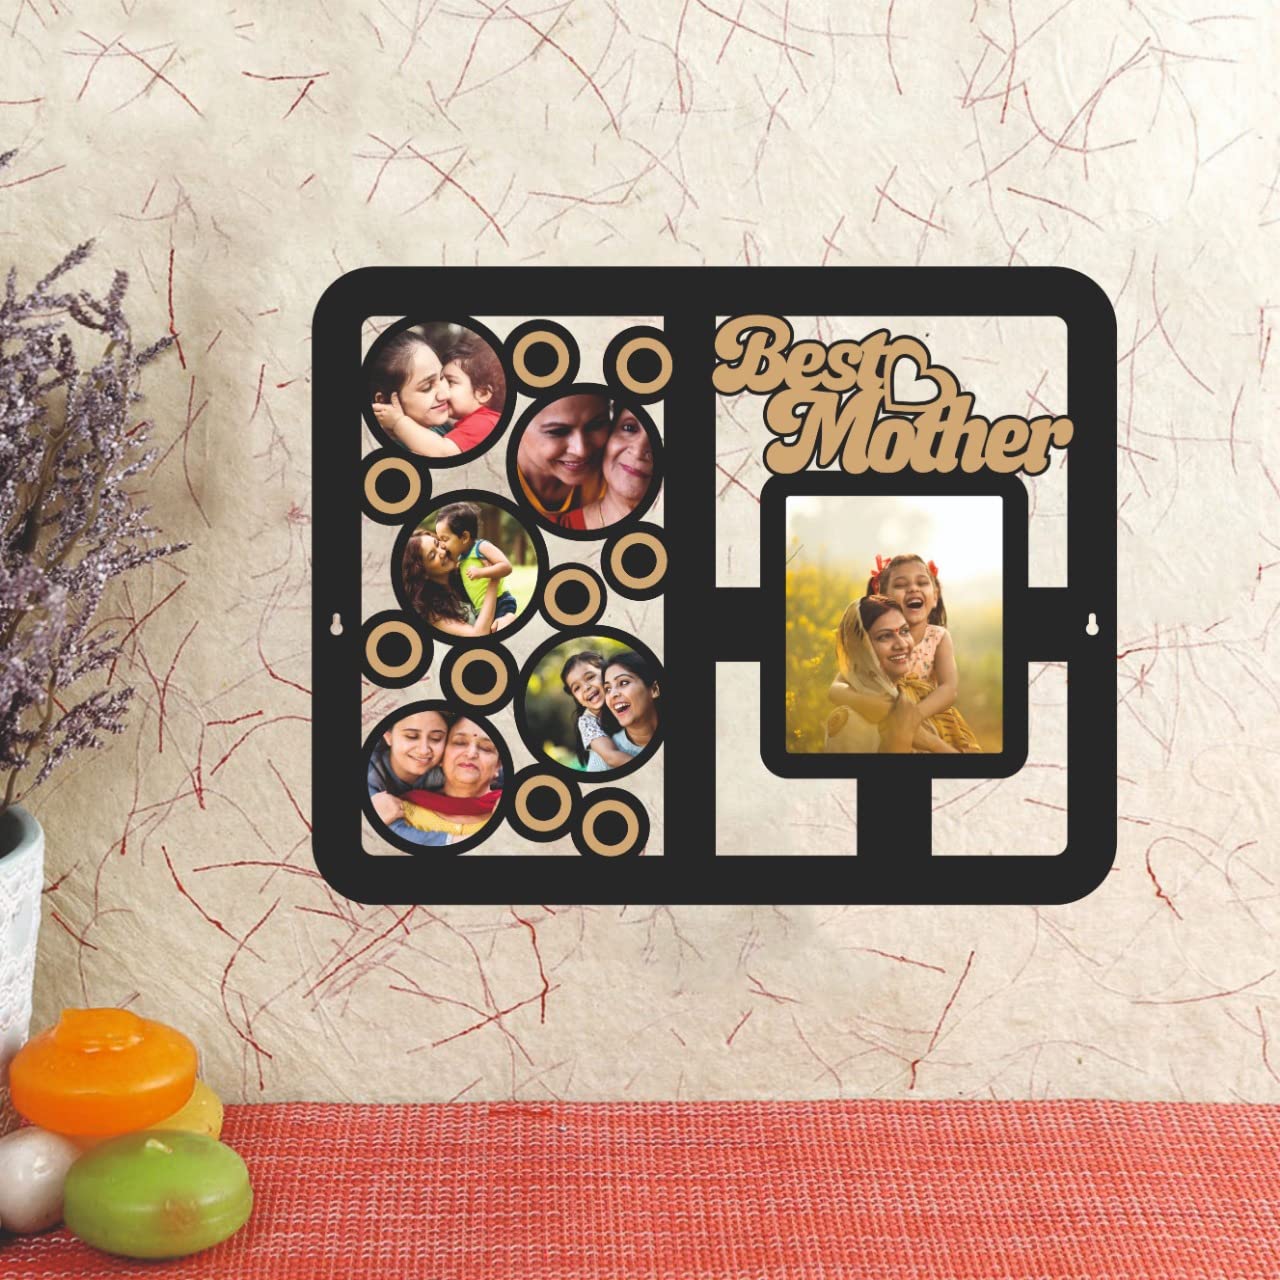 Best Mother Hanging Collage